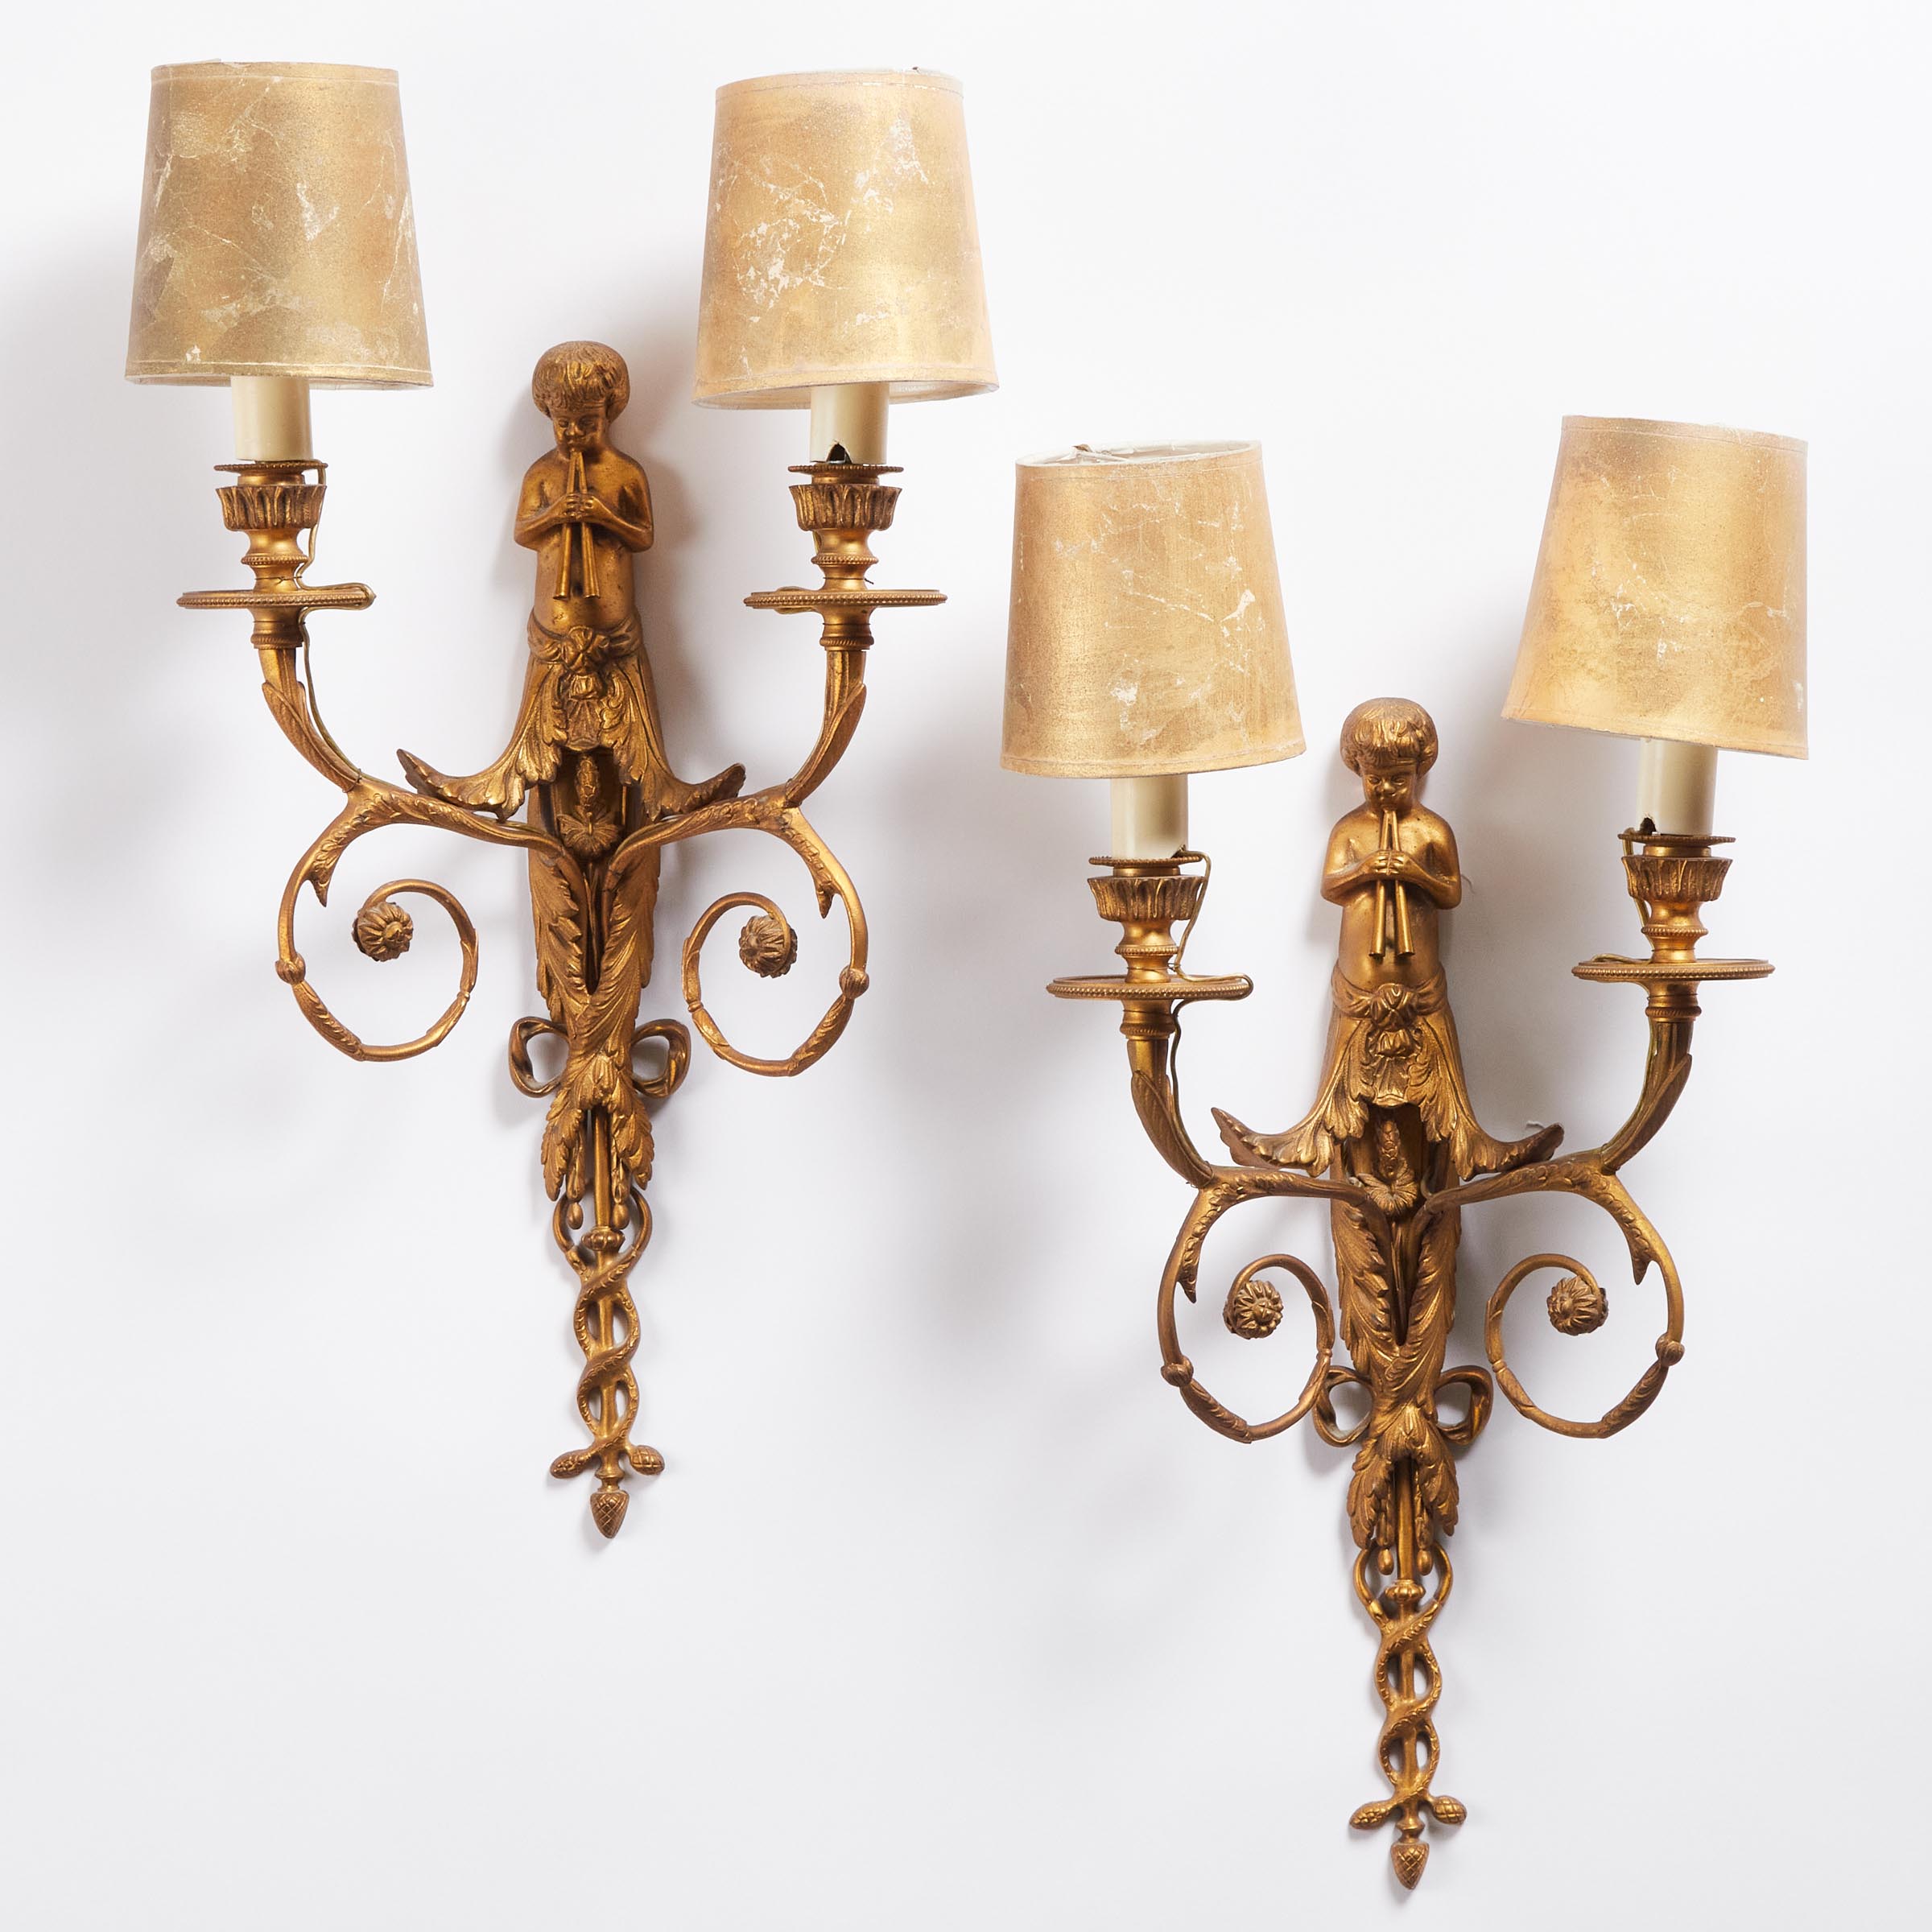 Pair of French Neoclassical Two-Light